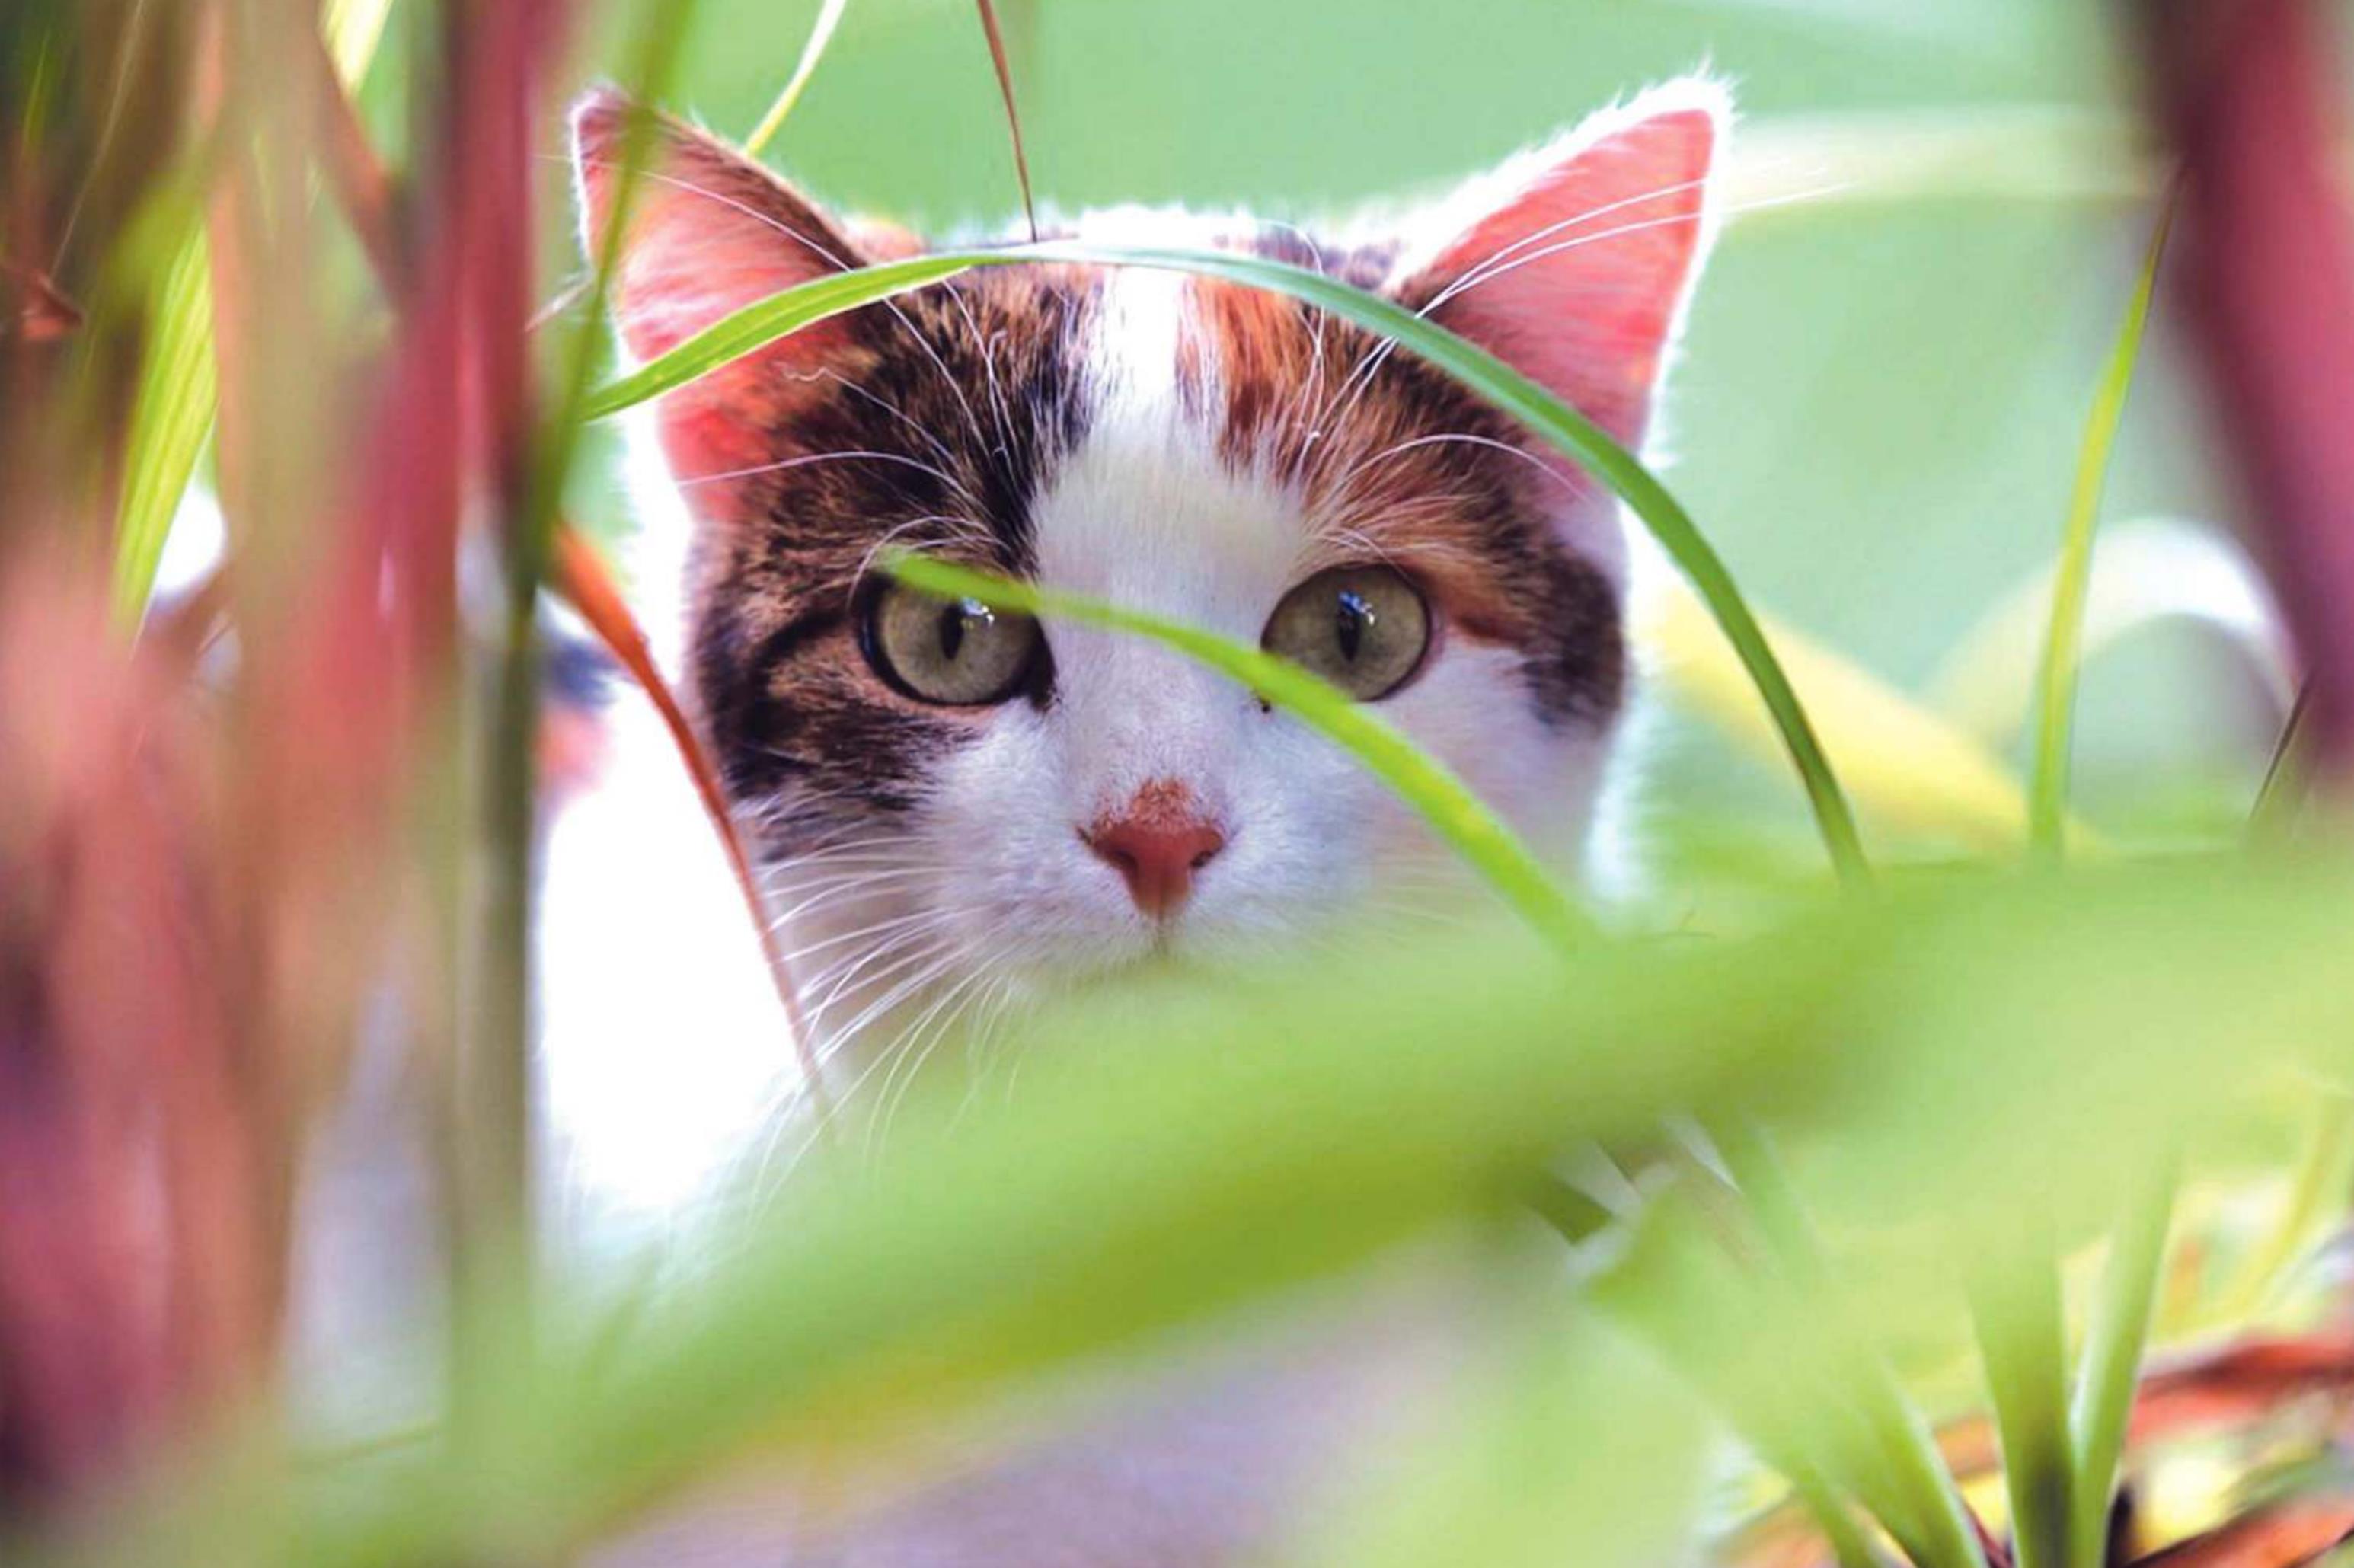 Cats may seek out grass as a source of fiber which can act as a mild laxative, trigger vomitting or serve as a mild pain reliever. If a cat seems to eat the grasses voraciously, owners may need to consult with a veterinarian to determine if the cat’s nutritional needs are being met.